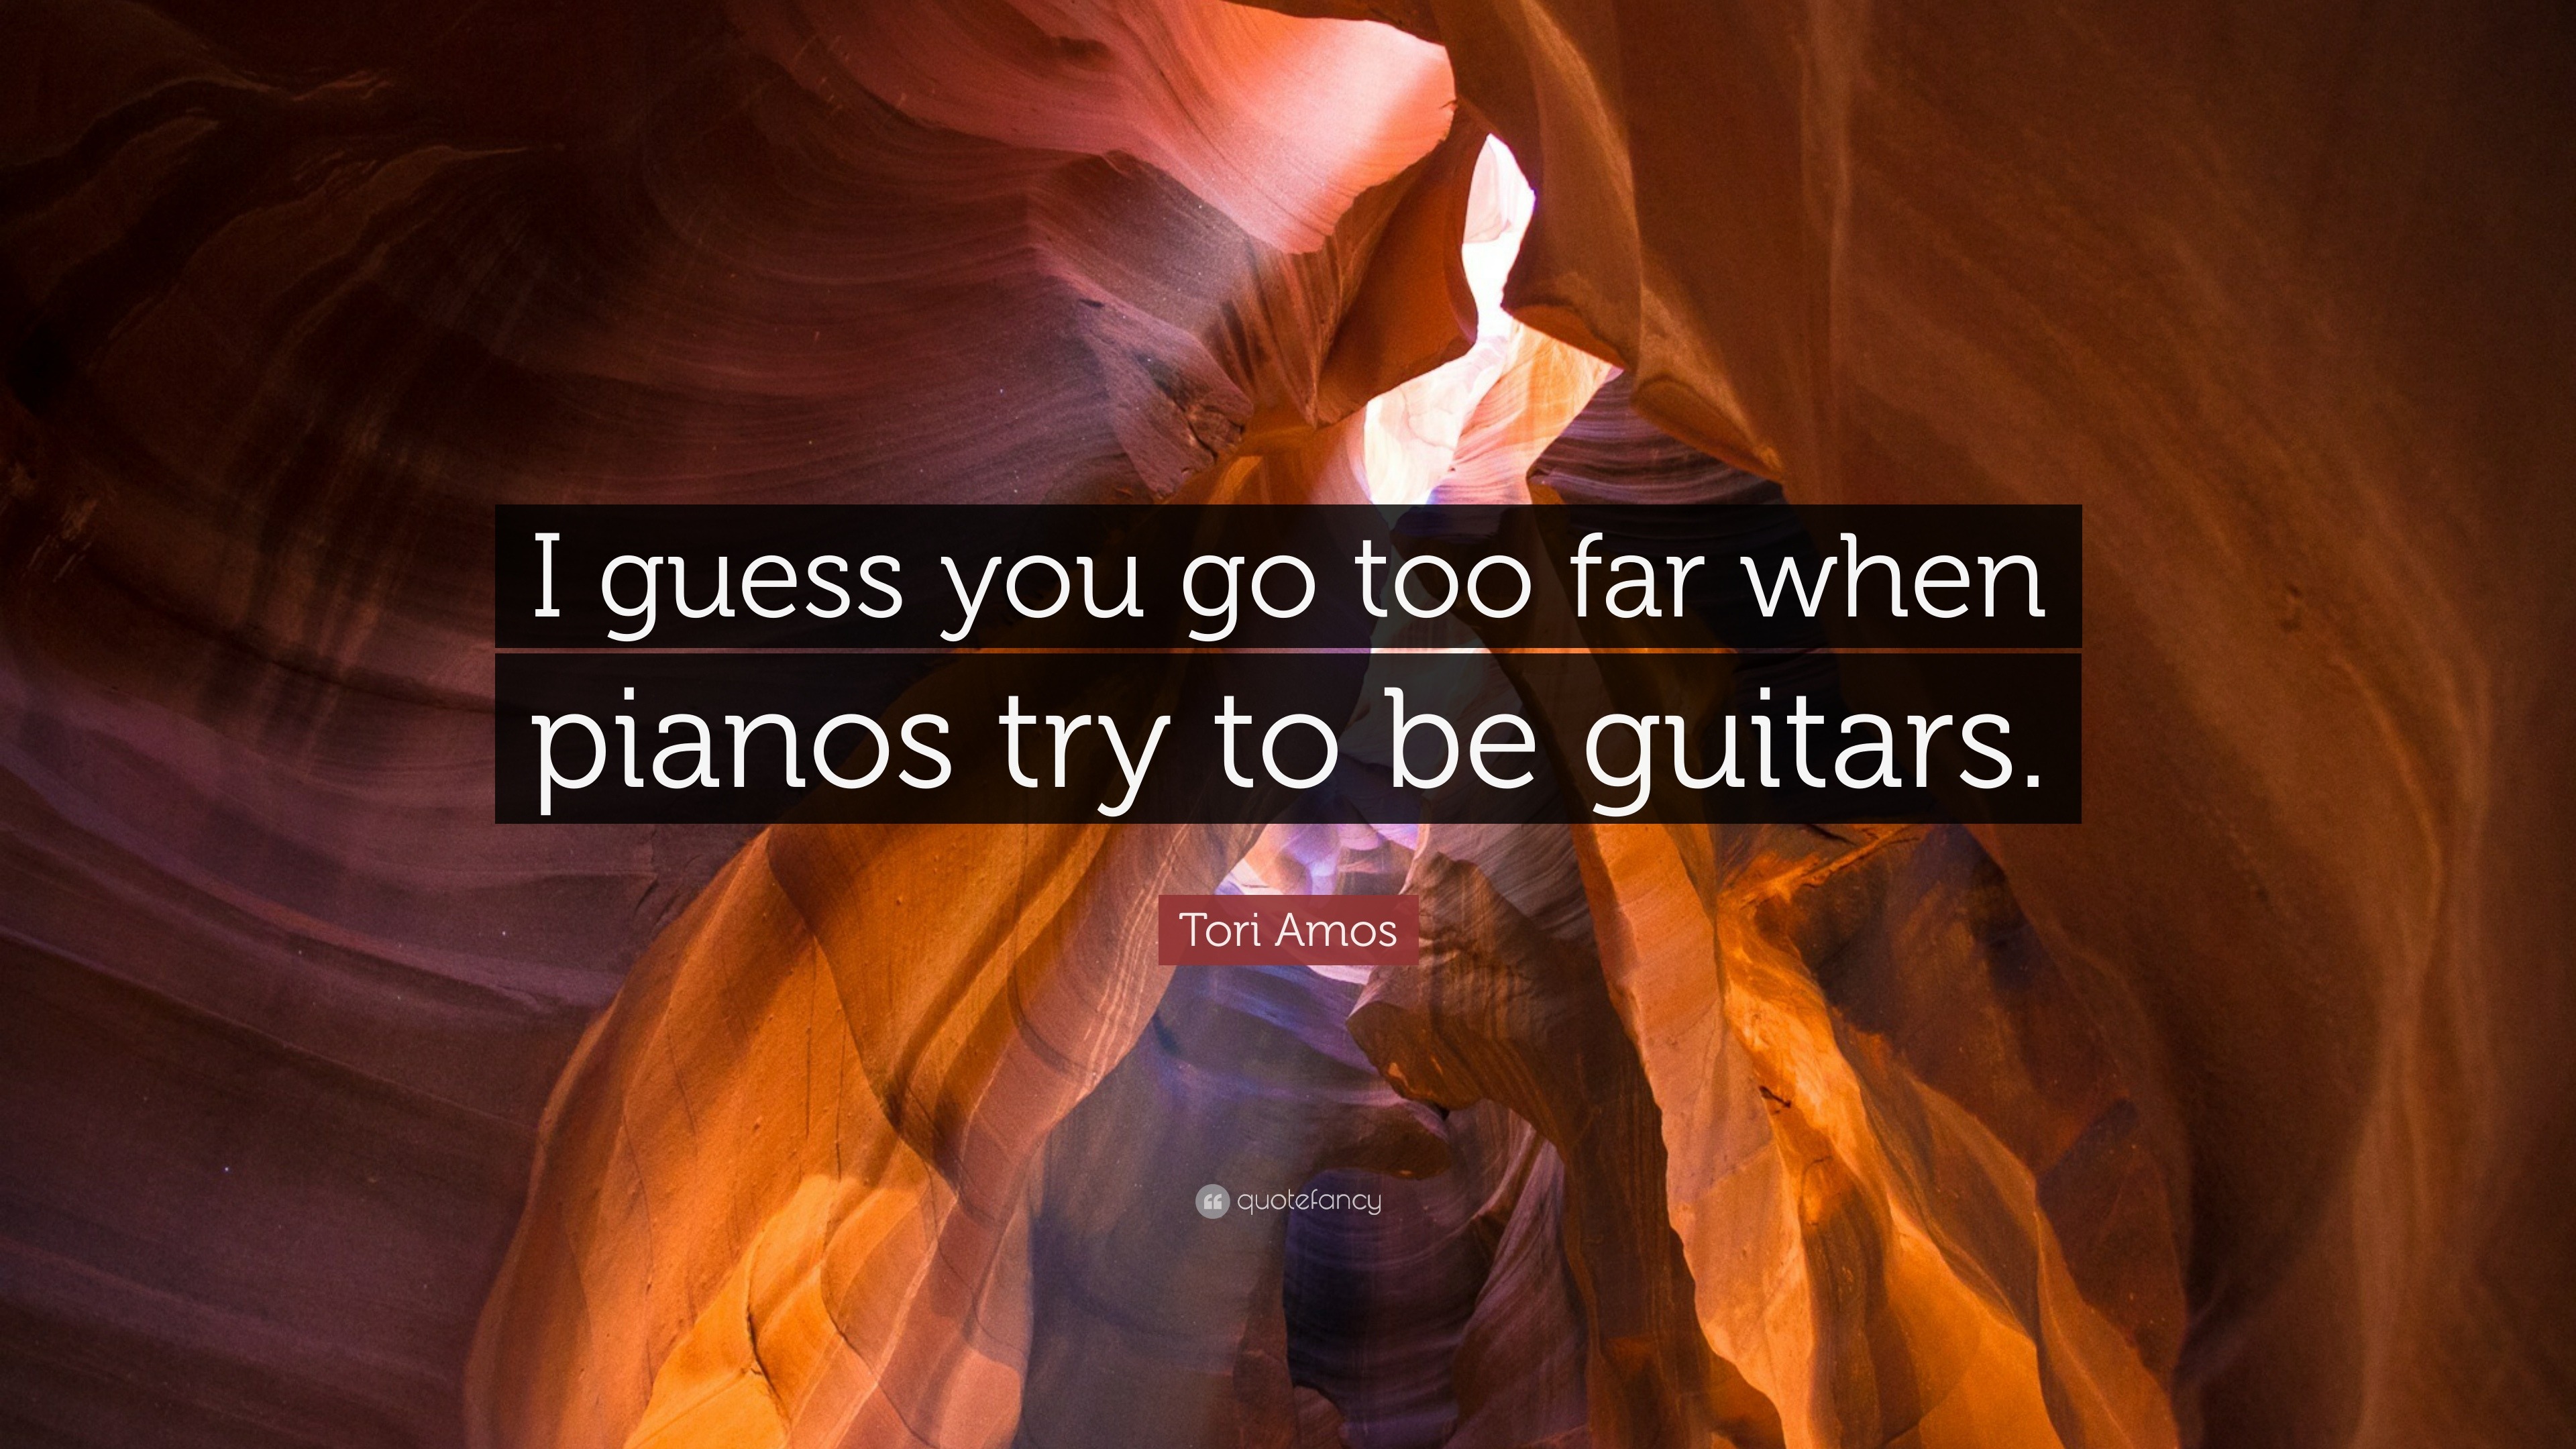 Tori Amos Quote: “I guess you go too